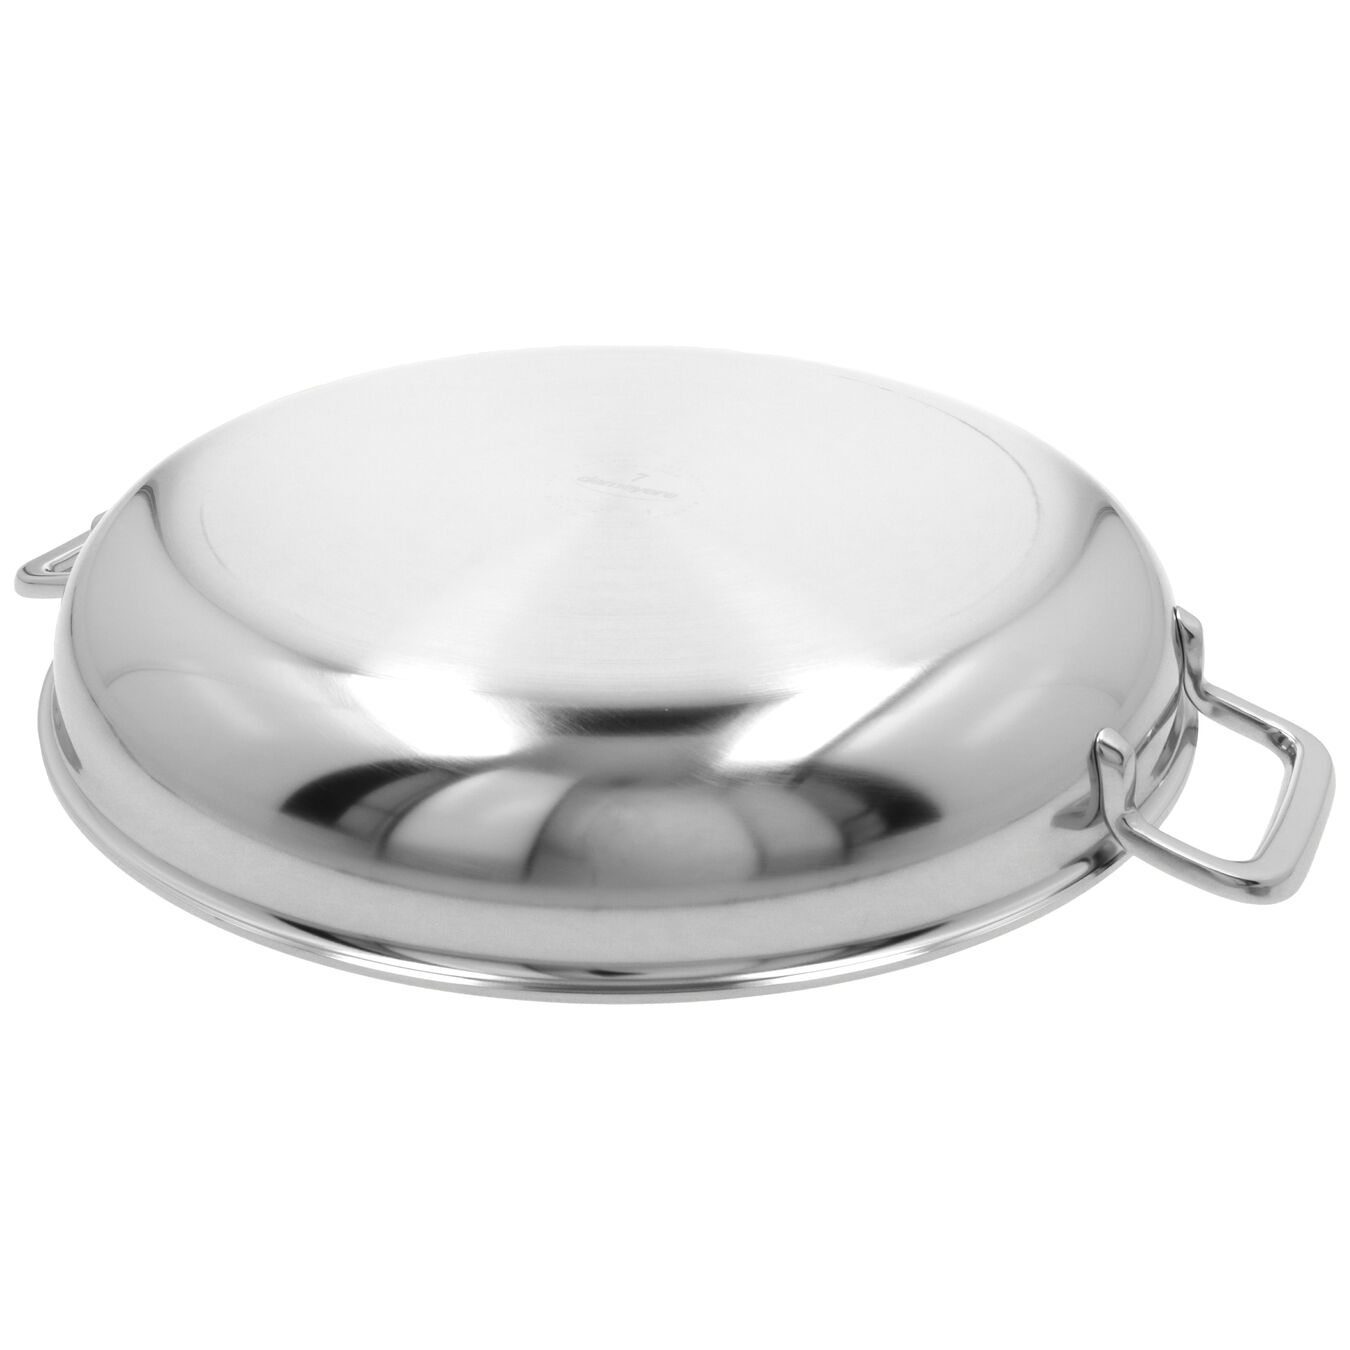 32 cm / 12.5 inch 18/10 Stainless Steel Frying pan with 2 handles,,large 2